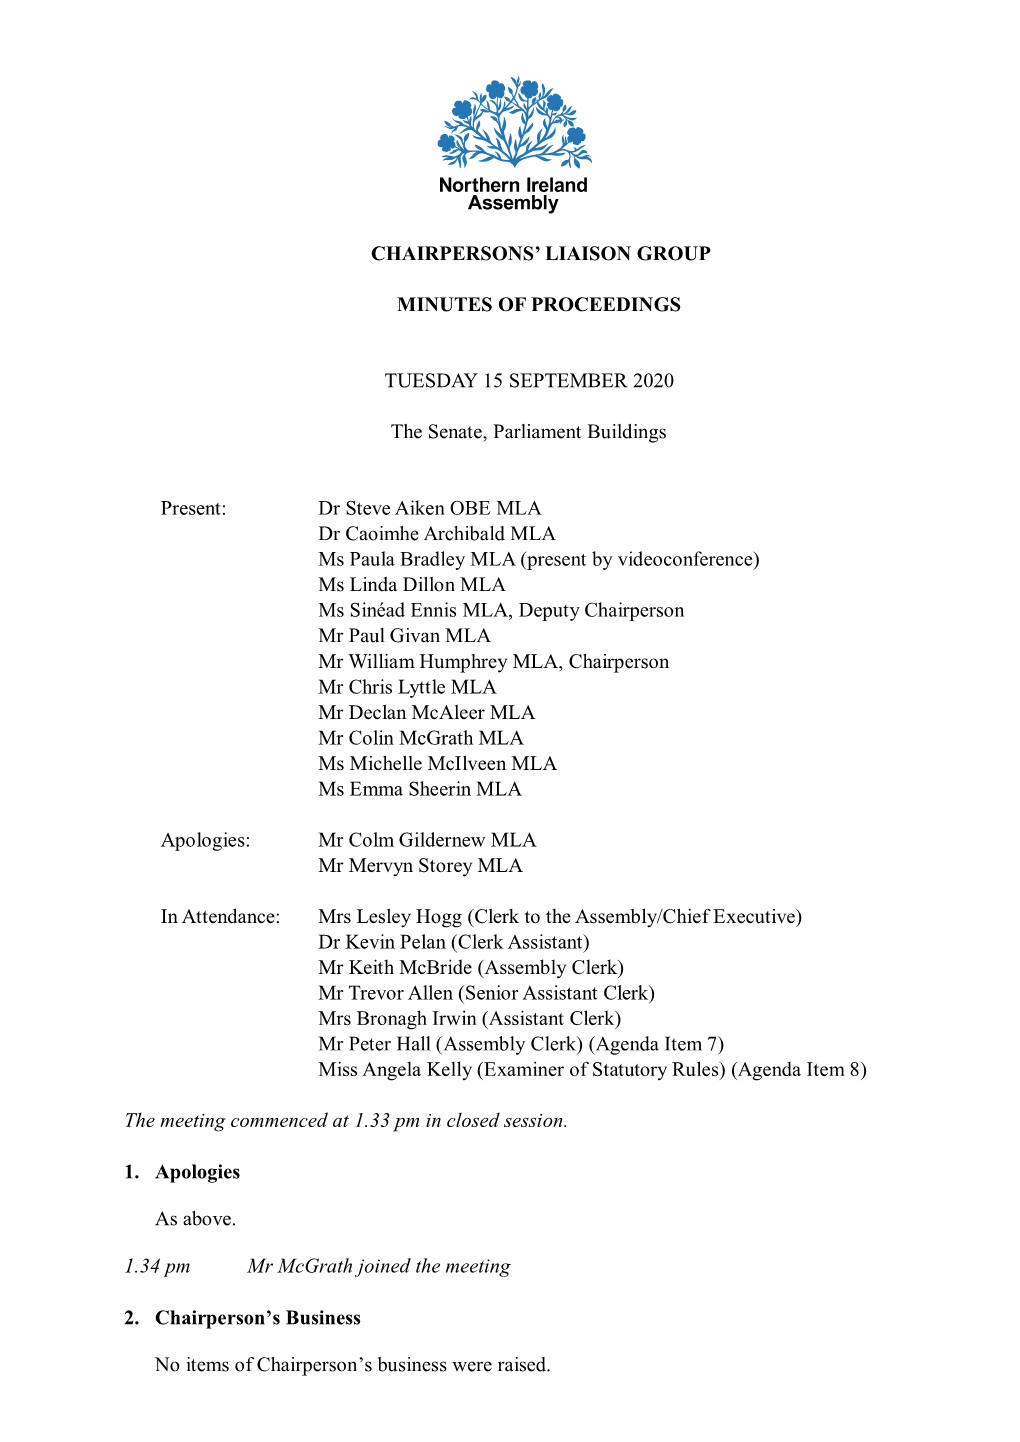 Chairpersons' Liaison Group Meeting Minutes of Proceedings 15 September 2020